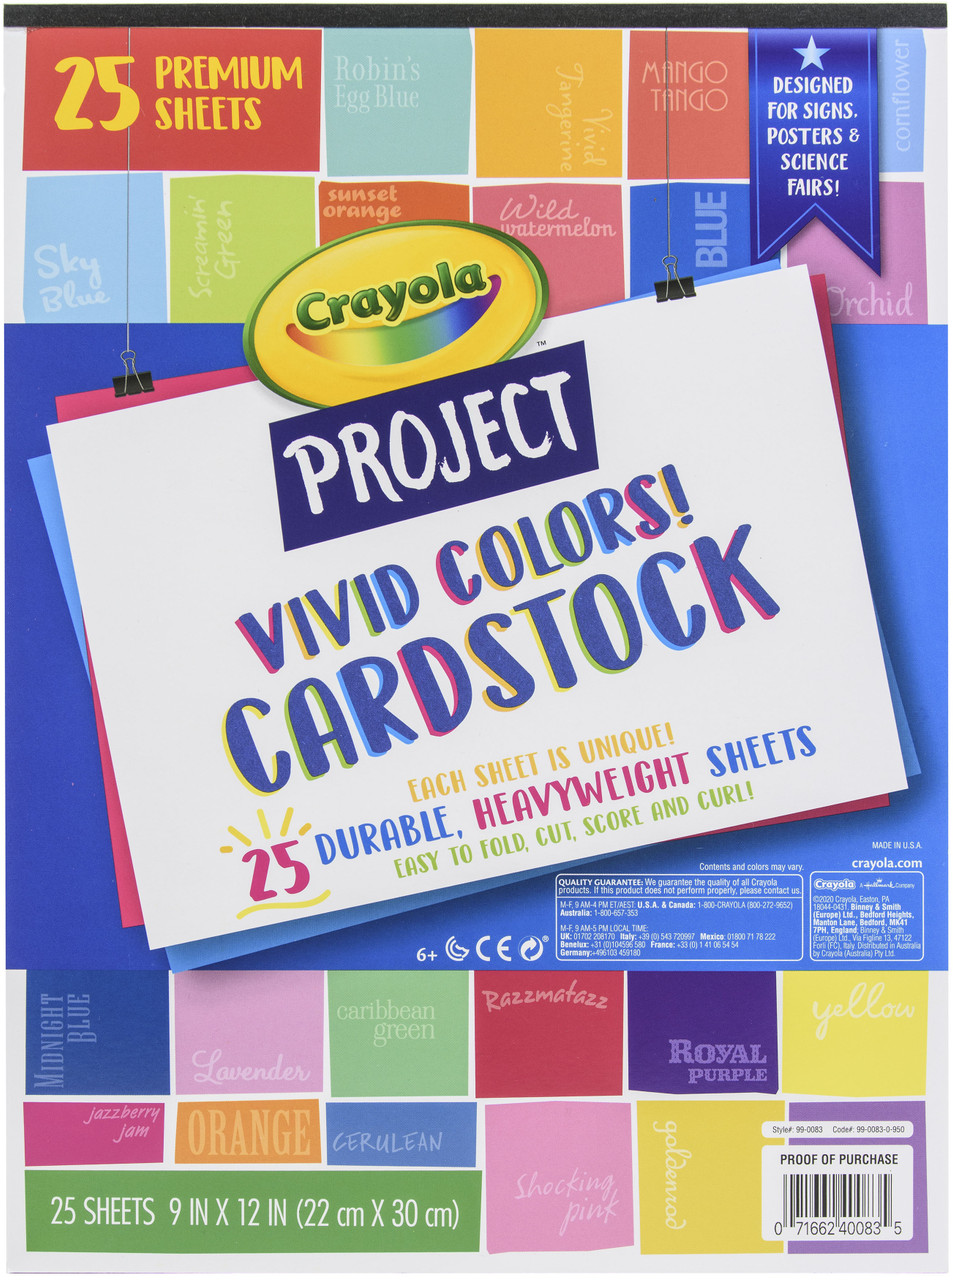 Crayola Project Giant Construction Paper 12 X18 -48 Sheets